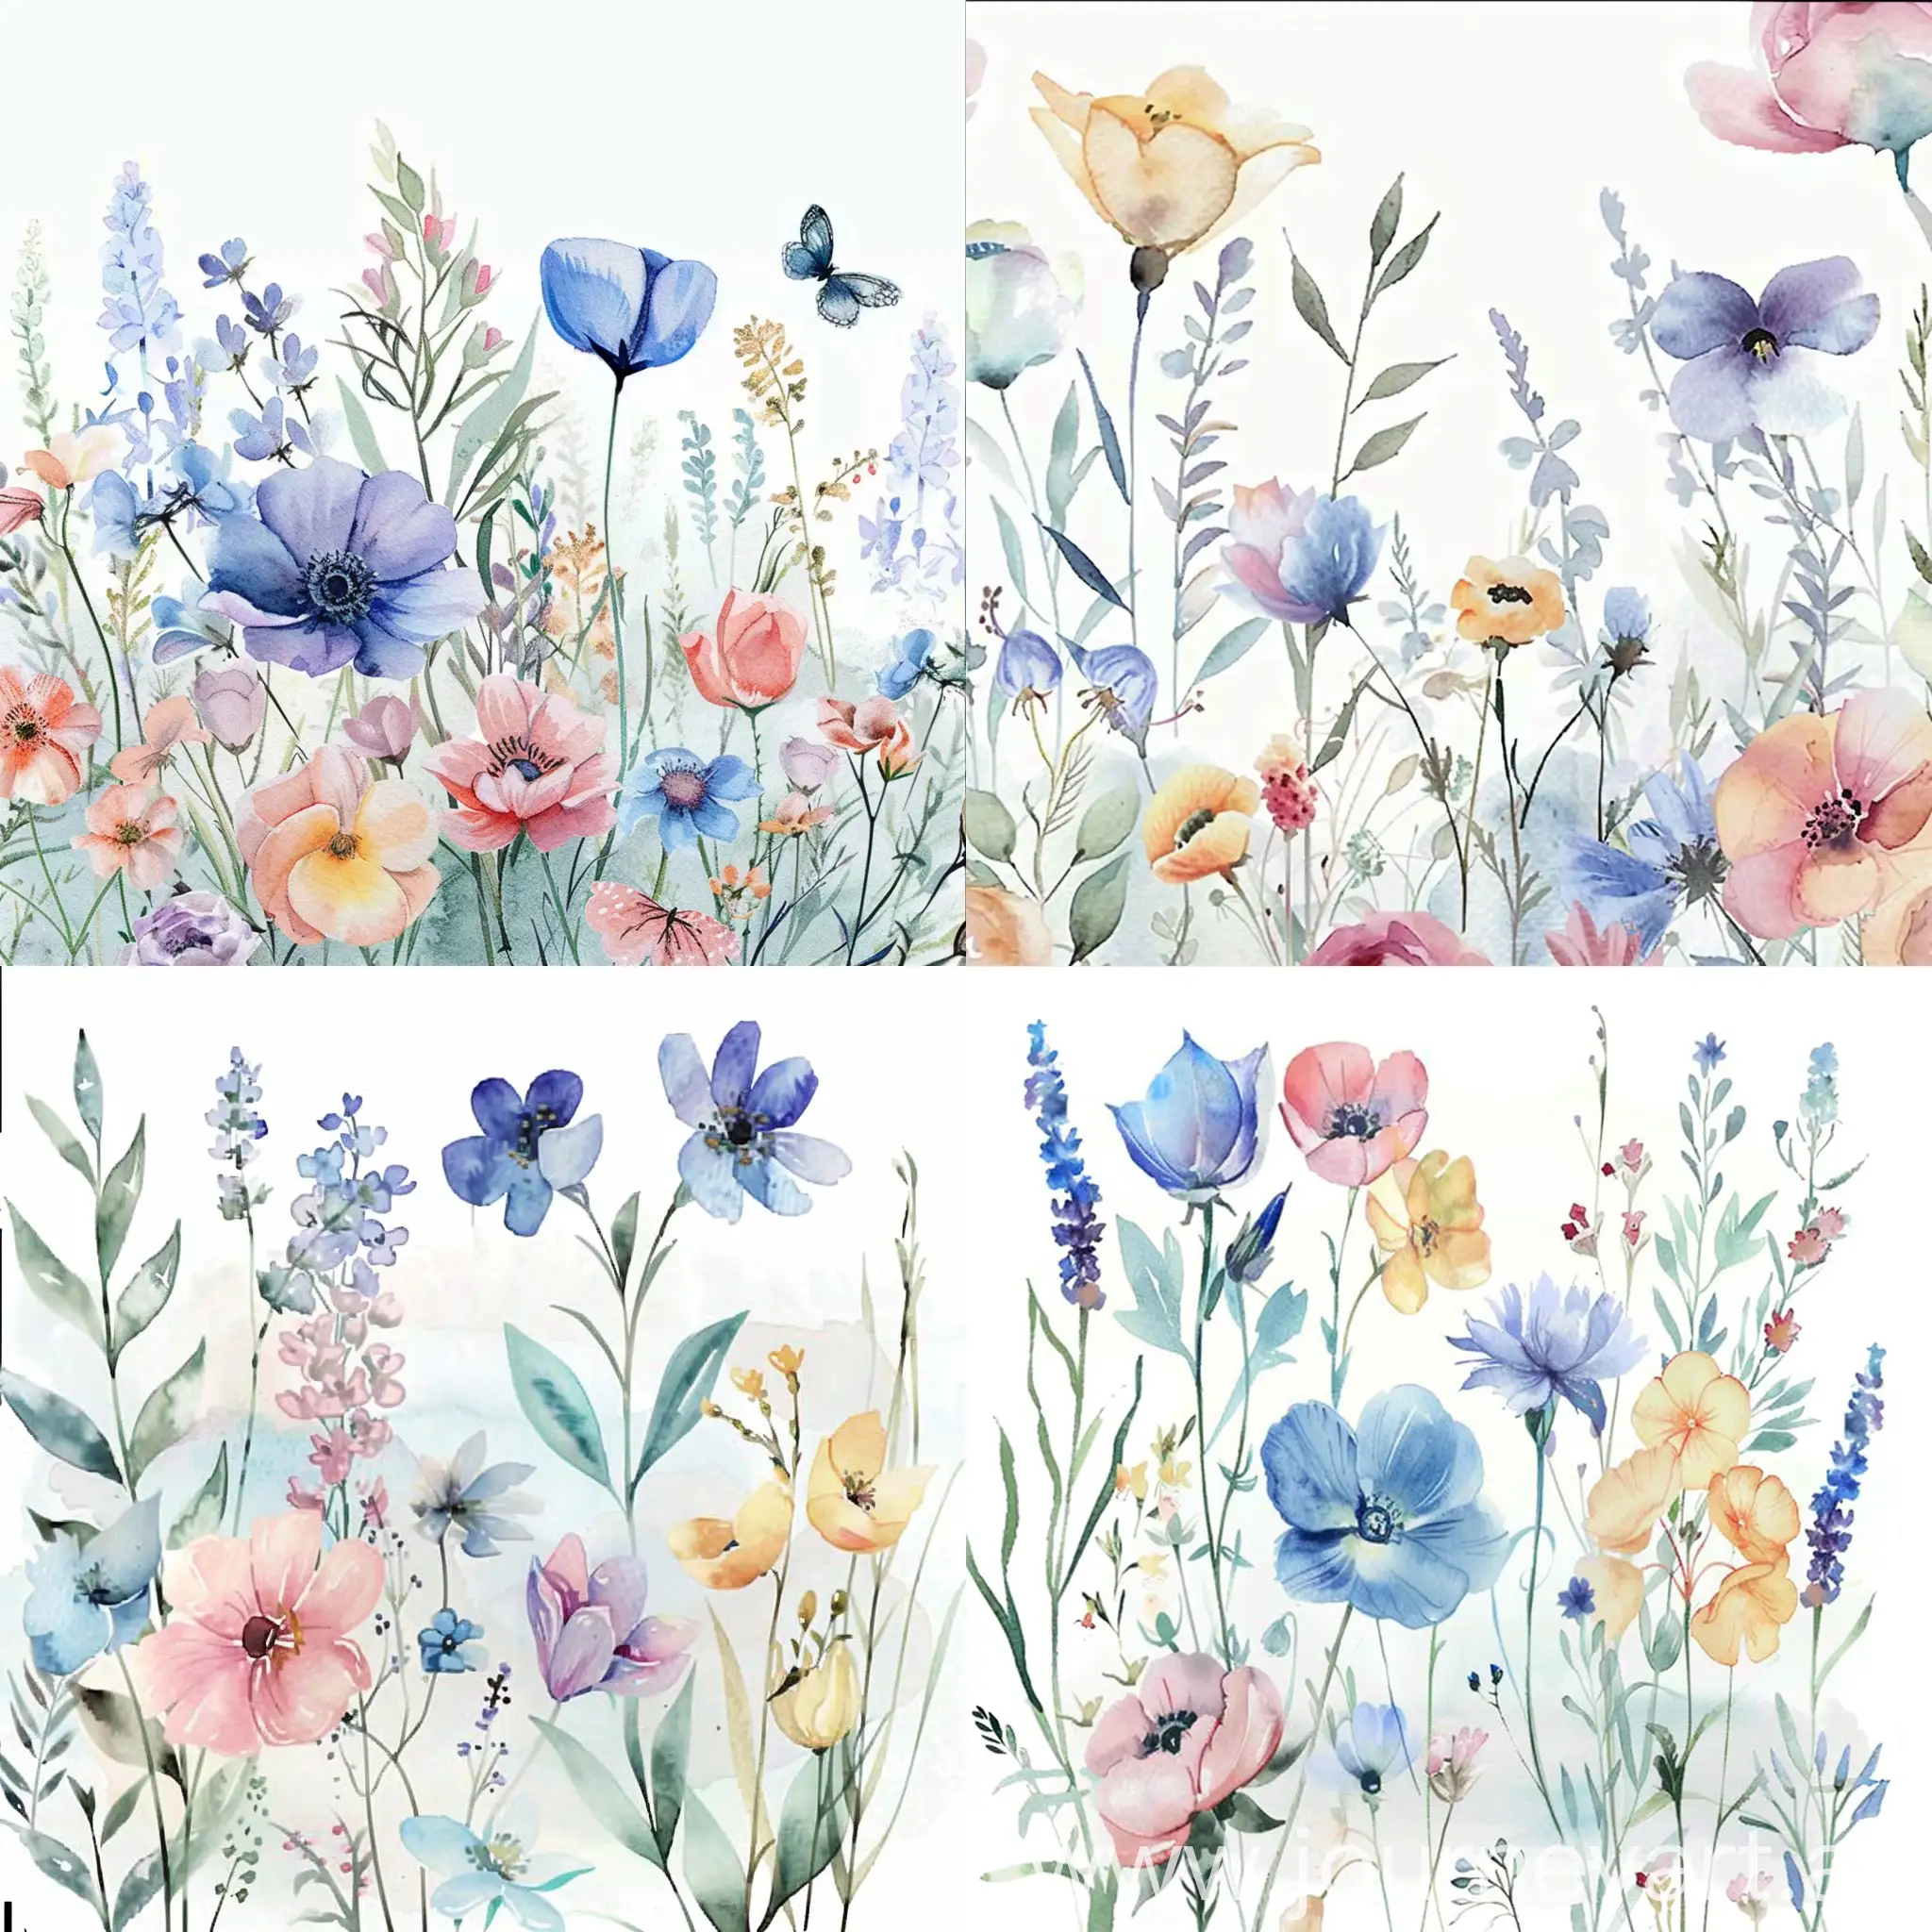 Delicate-HandPainted-Watercolor-Wildflowers-on-White-Background